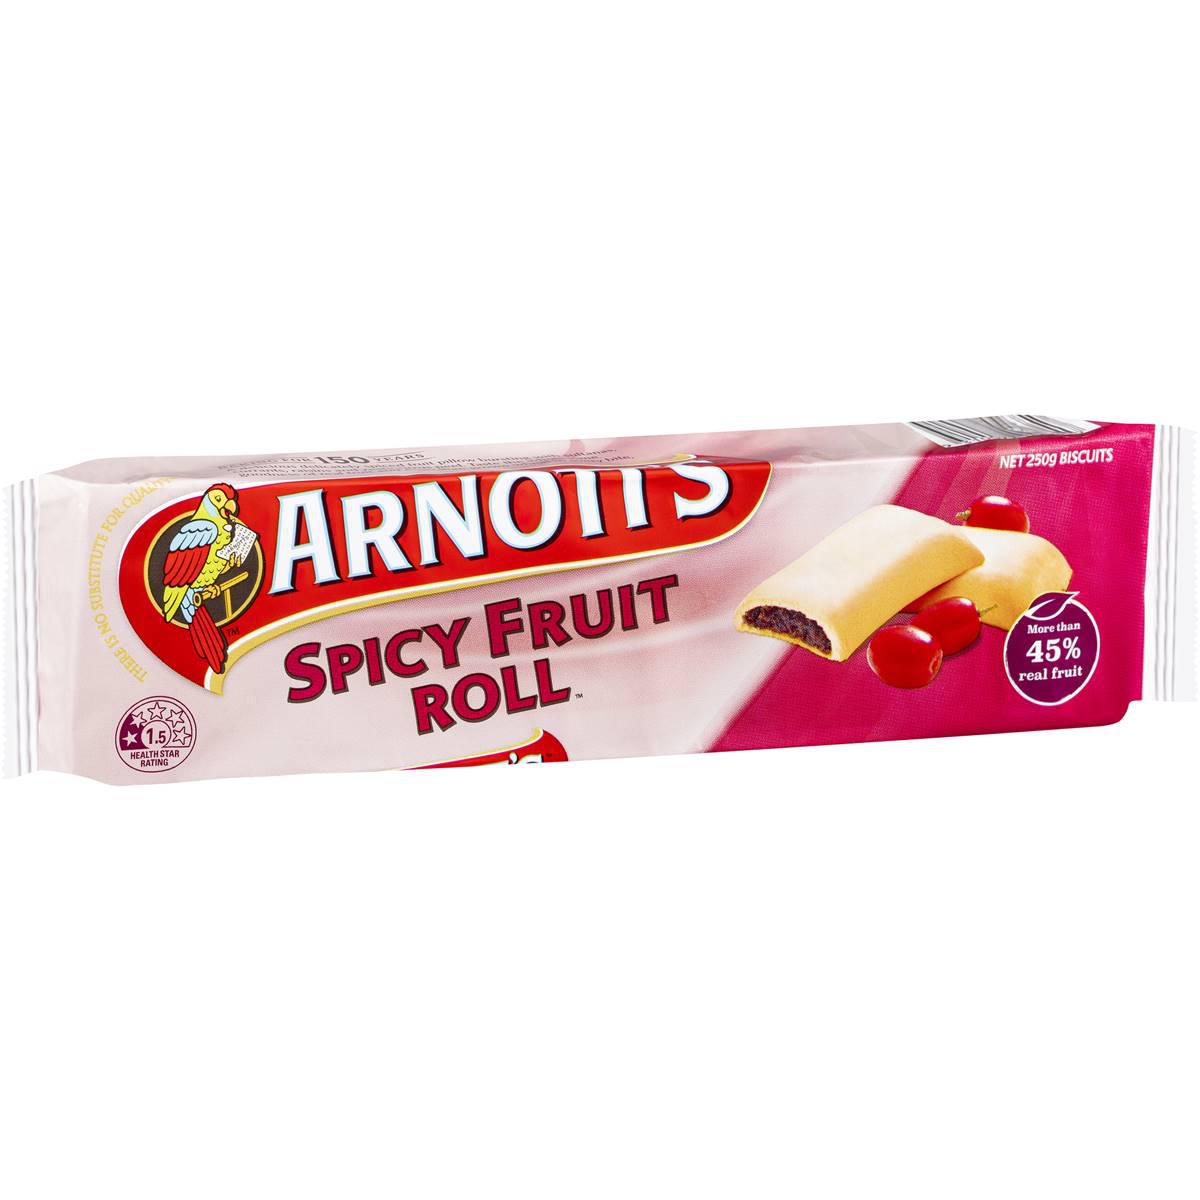 Arnott's Spicy Fruit Roll Biscuits 250g